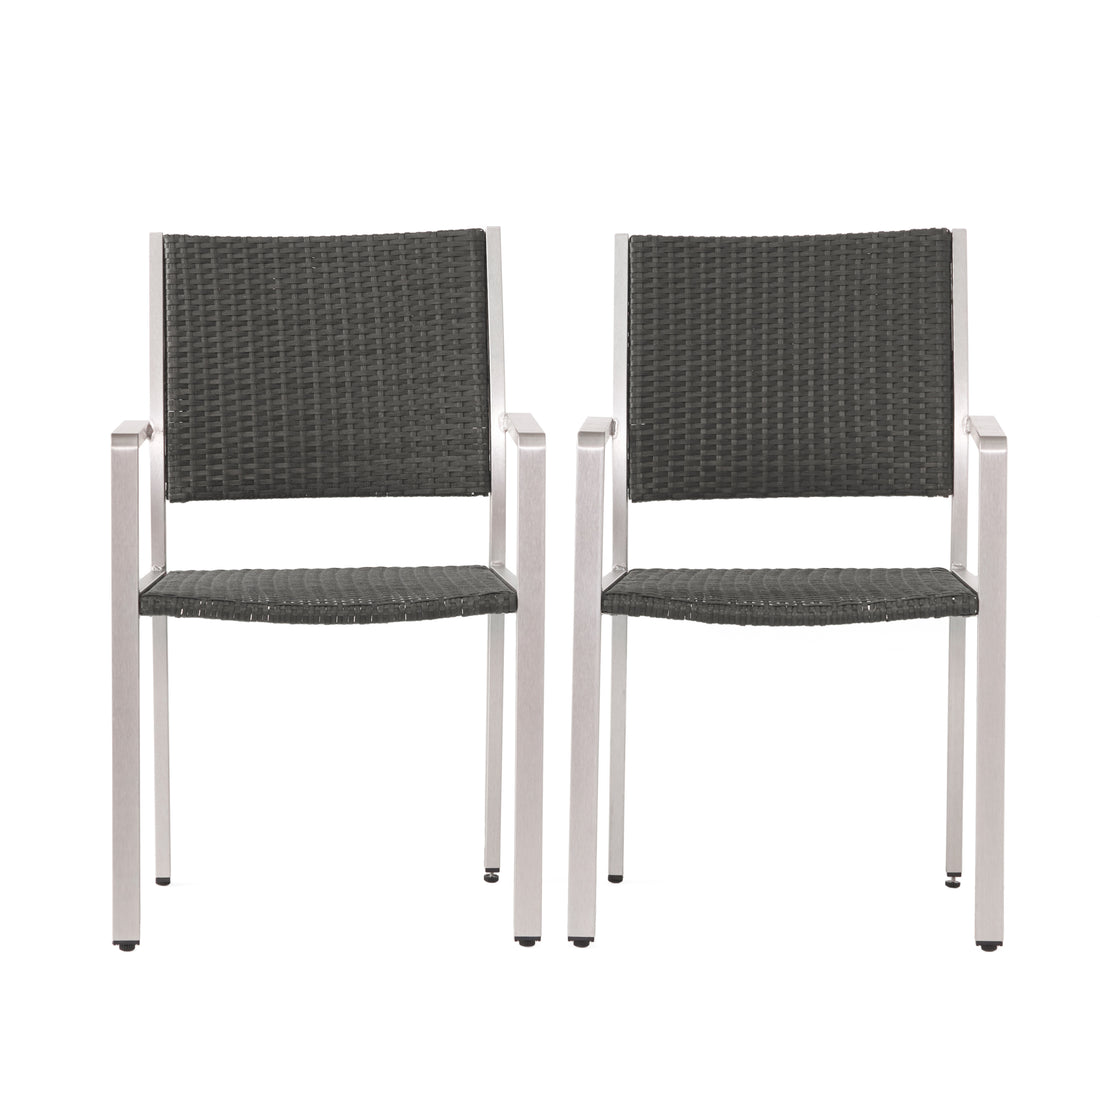 Cape Coral Outdoor Wicker Dining Chairs With